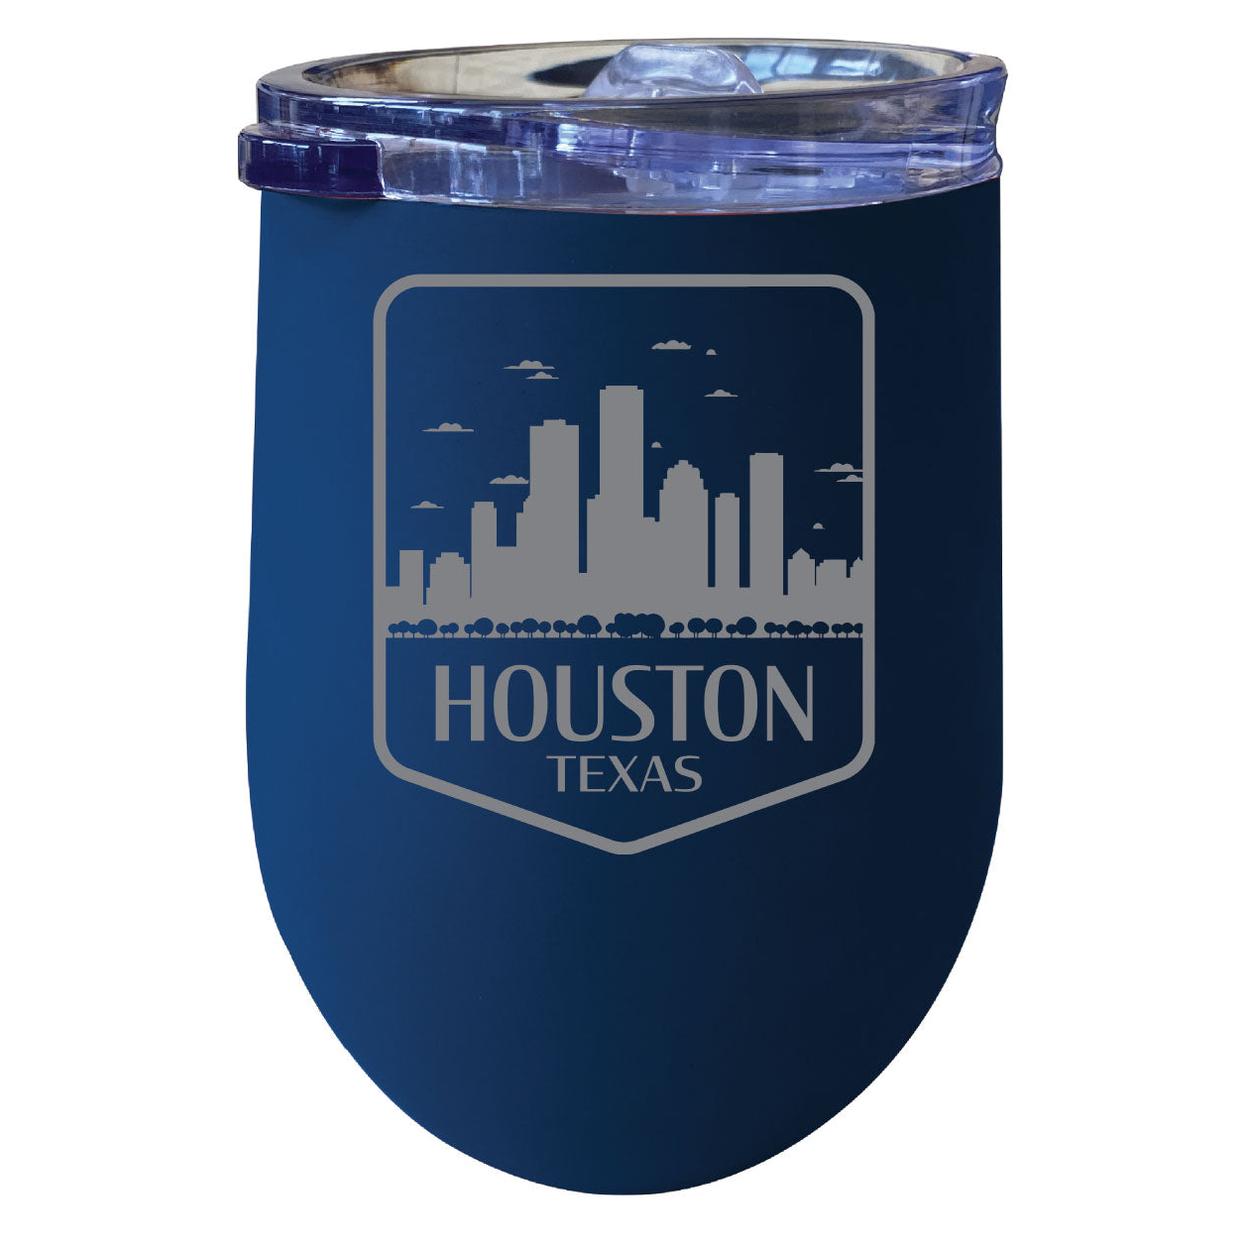 Houston Texas Souvenir 12 Oz Engraved Insulated Wine Stainless Steel Tumbler - Navy,,4-Pack